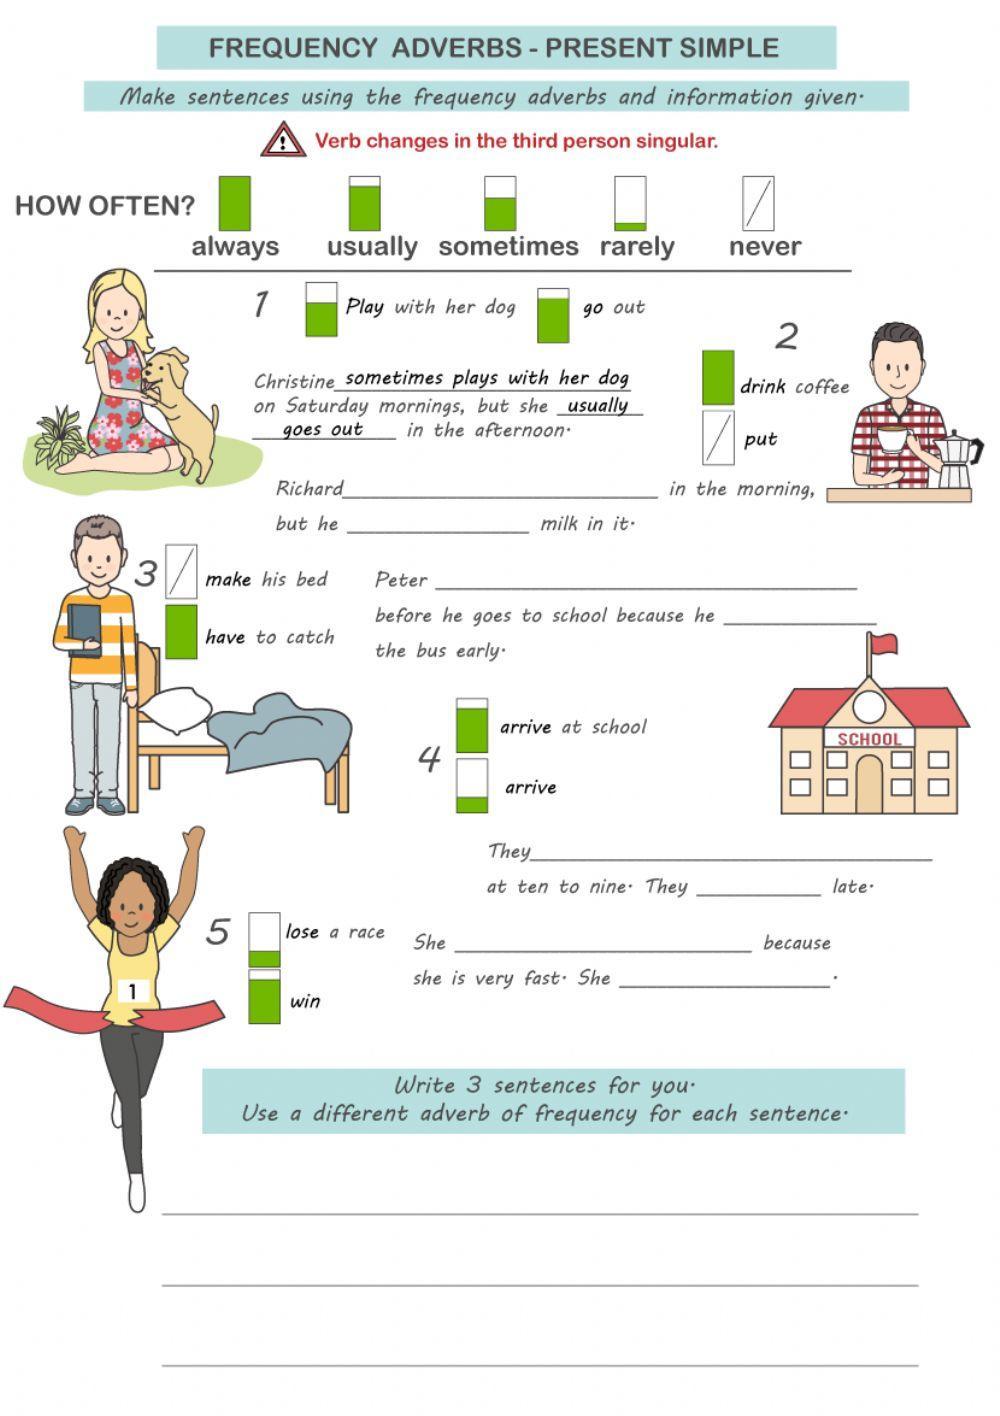 Adverbs of frequency-Present simple